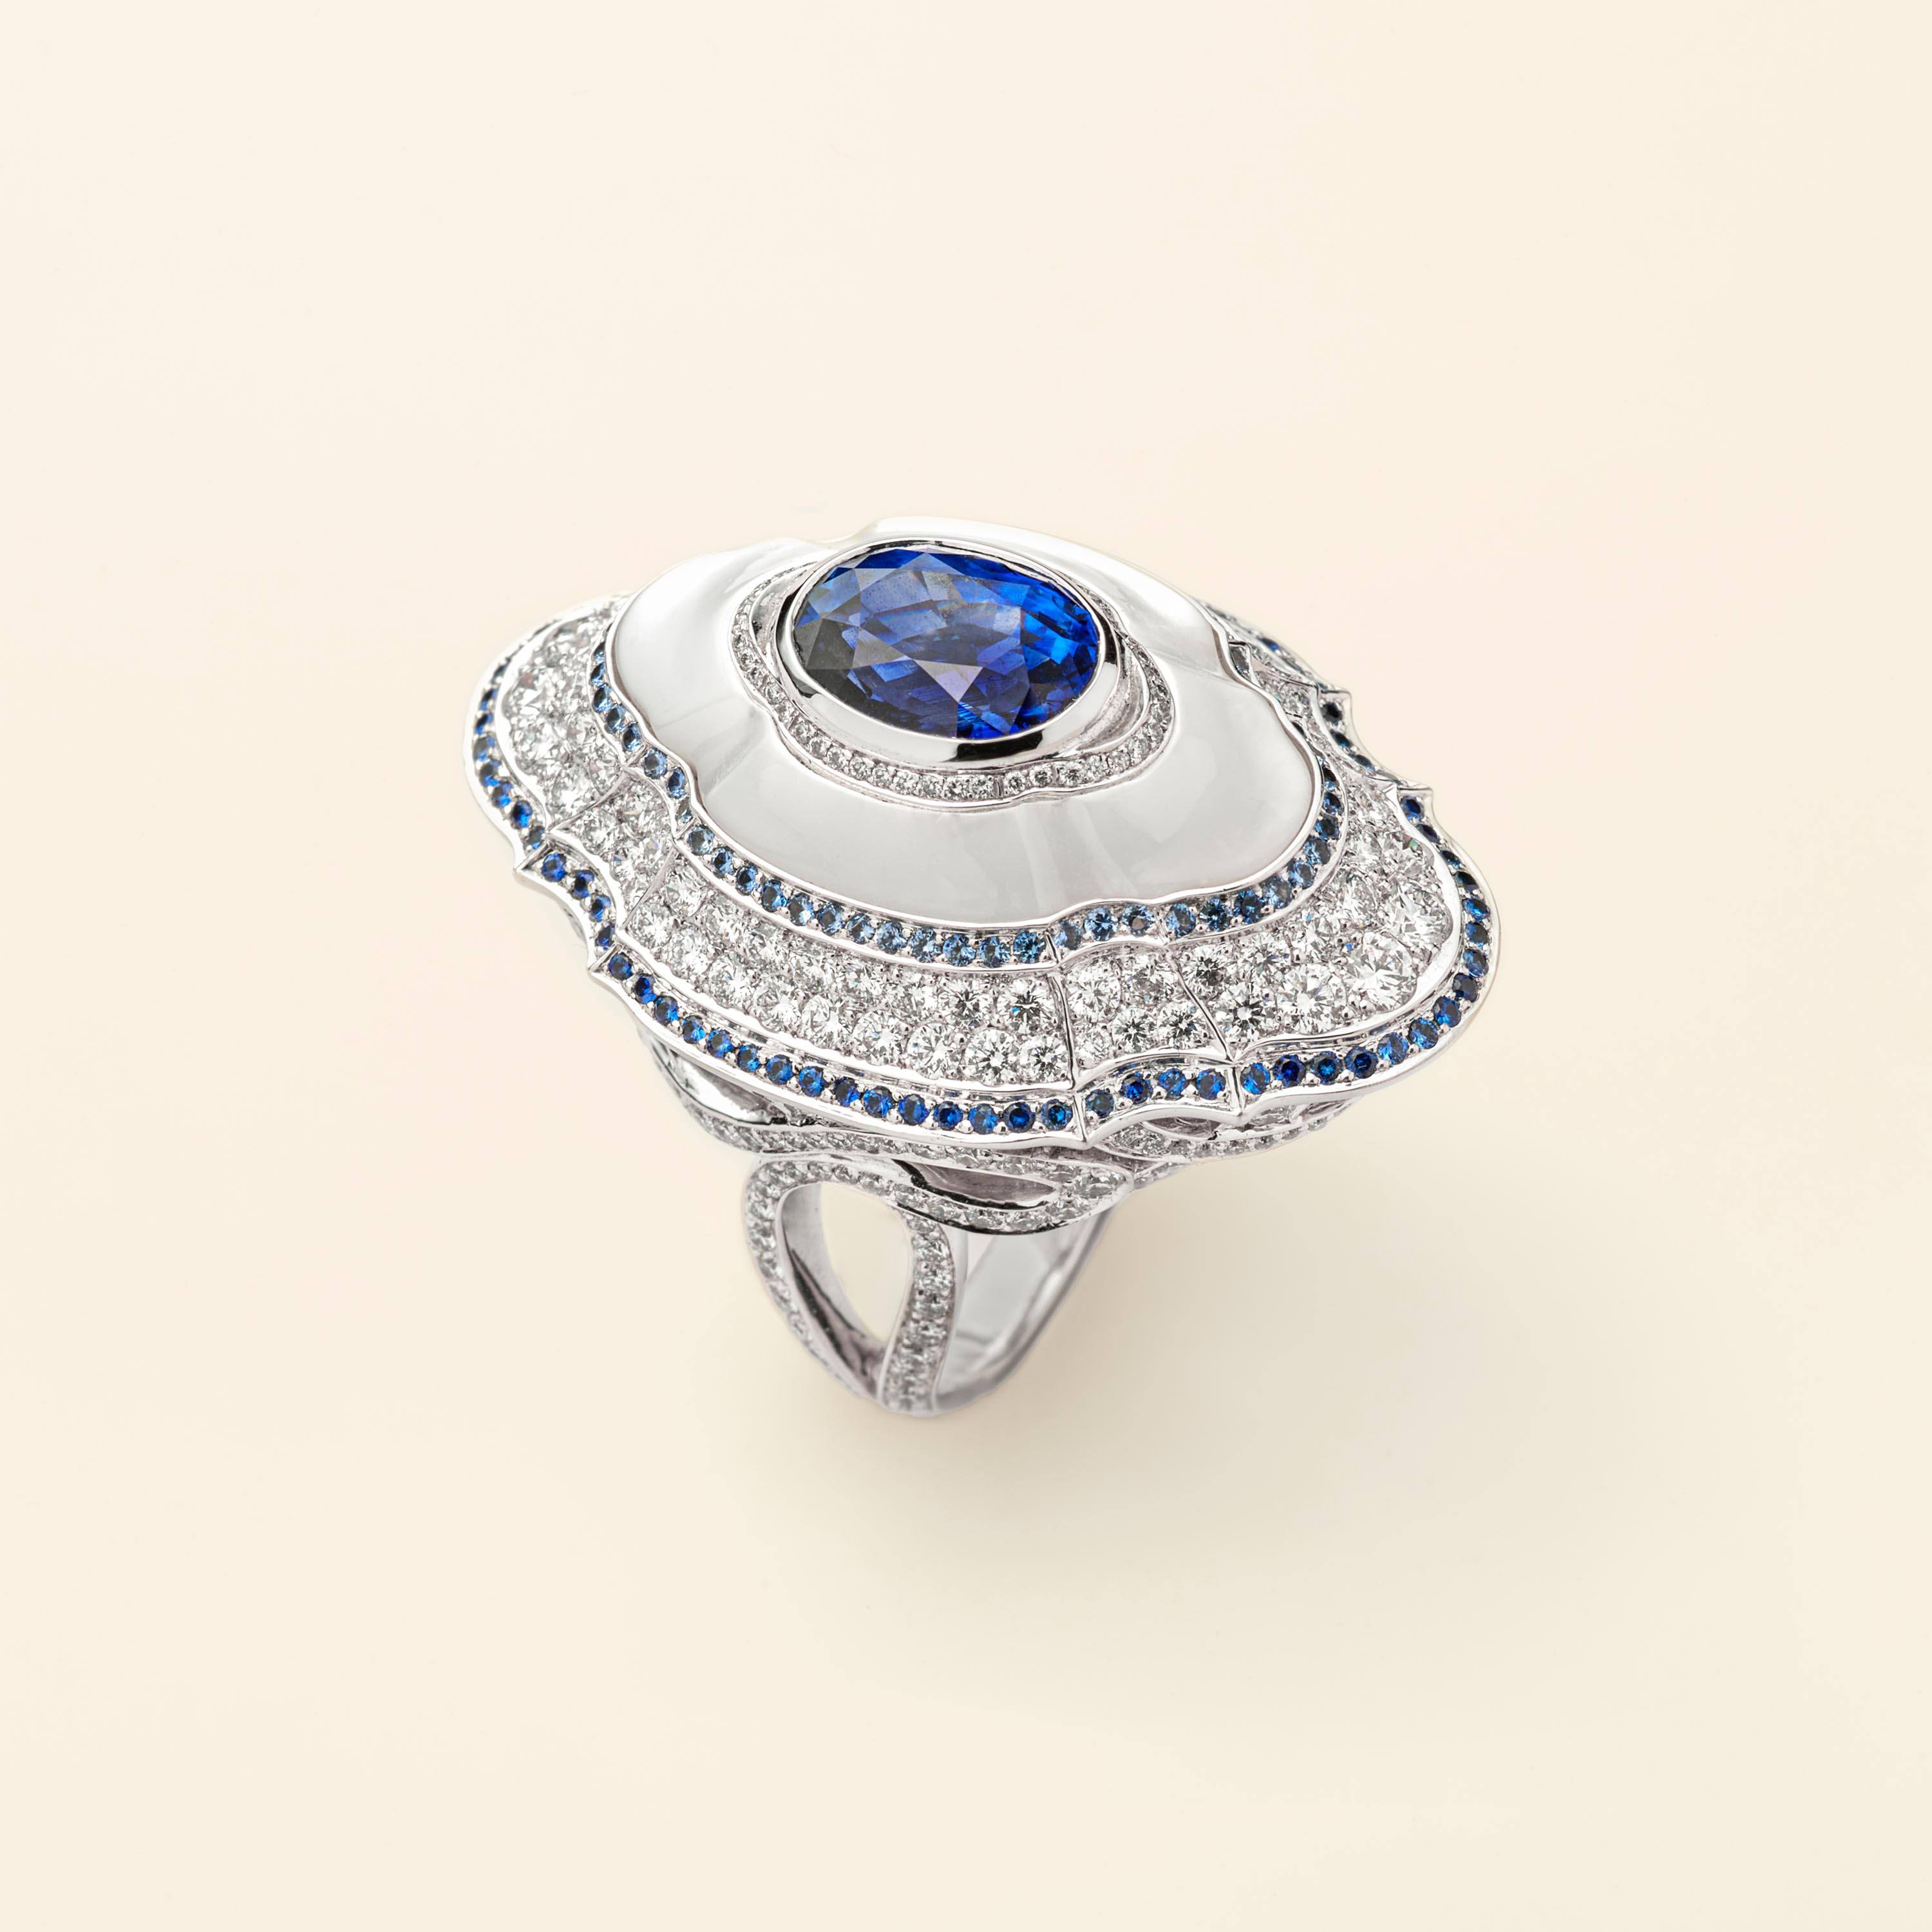 Millefiora Isola Bella Ring – High Jewelry ring in pink gold 18k with  sapphire, tsavorite and spessartite – Mellerio